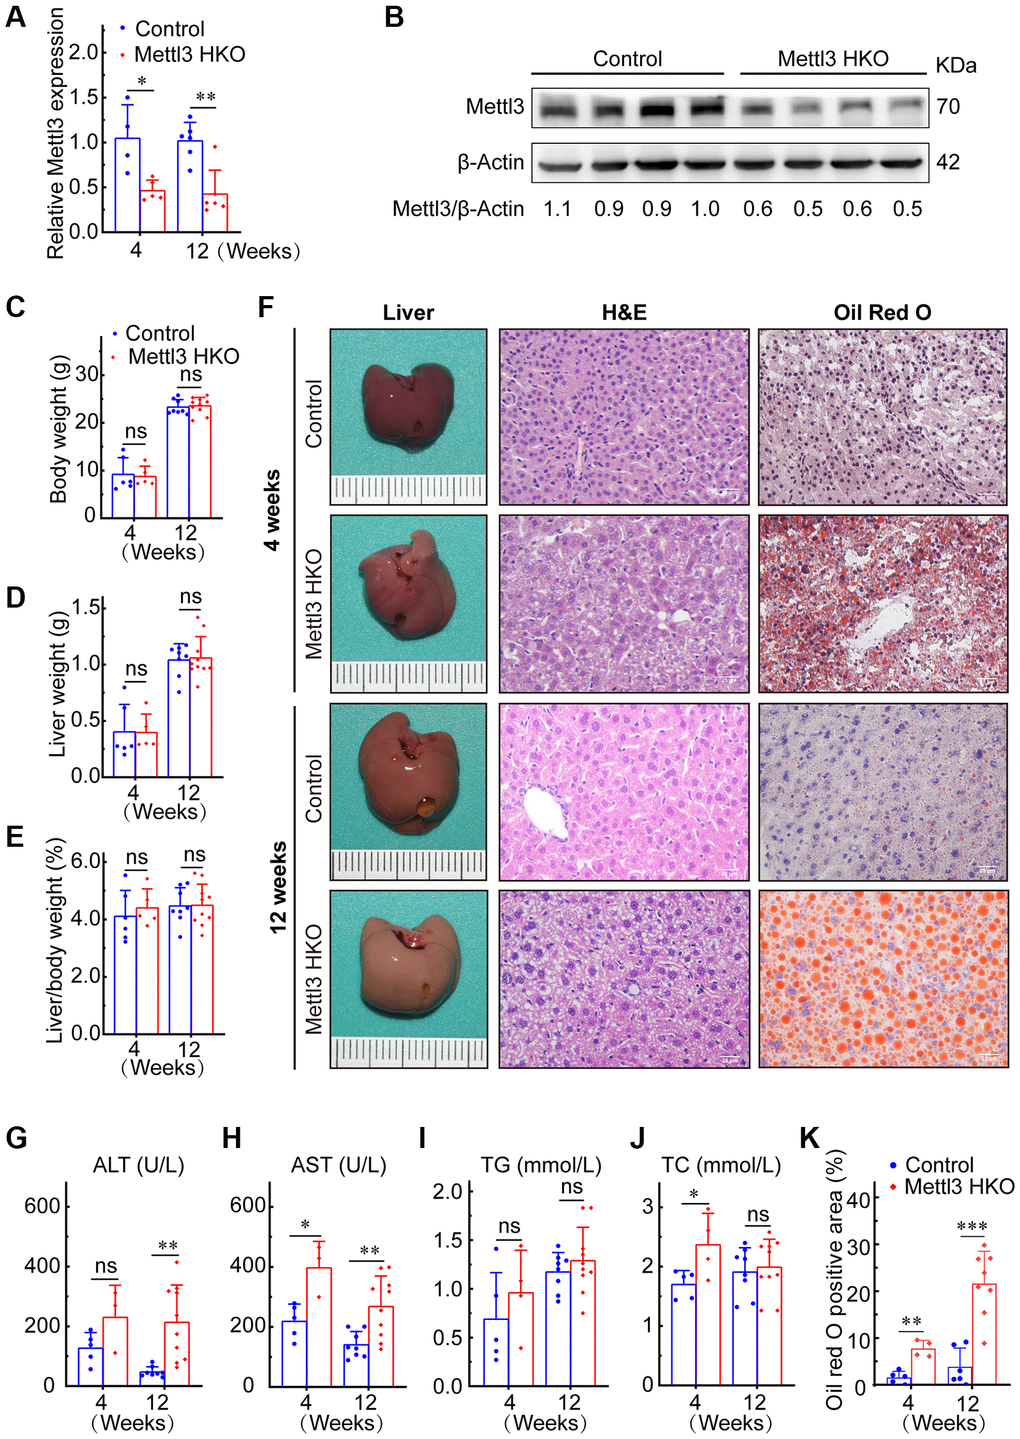 Hepatocyte-specific deletion of Mettl3 induces lipid accumulation in mouse liver cells. (A) qRT-PCR assay of the relative Mettl3 expression in control and METTL3 HKO mouse livers at 4 and 12 weeks. (B) Representative Western blot analysis and quantitative results in control and METTL3 HKO mouse livers. (C–F) Body weight (C), liver weight (D), and liver-to-body weight ratio (E) of METTL3 HKO and control mice at 4 and 12 weeks. (F) Representative images of the livers of METTL3 HKO (n = 5 for 4 weeks; n = 10 for 12 weeks) and control mice (n = 6 for 4 weeks; n = 8 for 12 weeks) stained with hematoxylin and eosin and Oil red O. Scale bars, 25 μm. (G–K) Serum levels of ALT (G), AST (H), TG (I), TC (J), and Oil red O positive area (K). Data are presented as mean ± SD. Abbreviations: TG: triglyceride; TC: total cholesterol; ns: not significant; *P **P ***P 